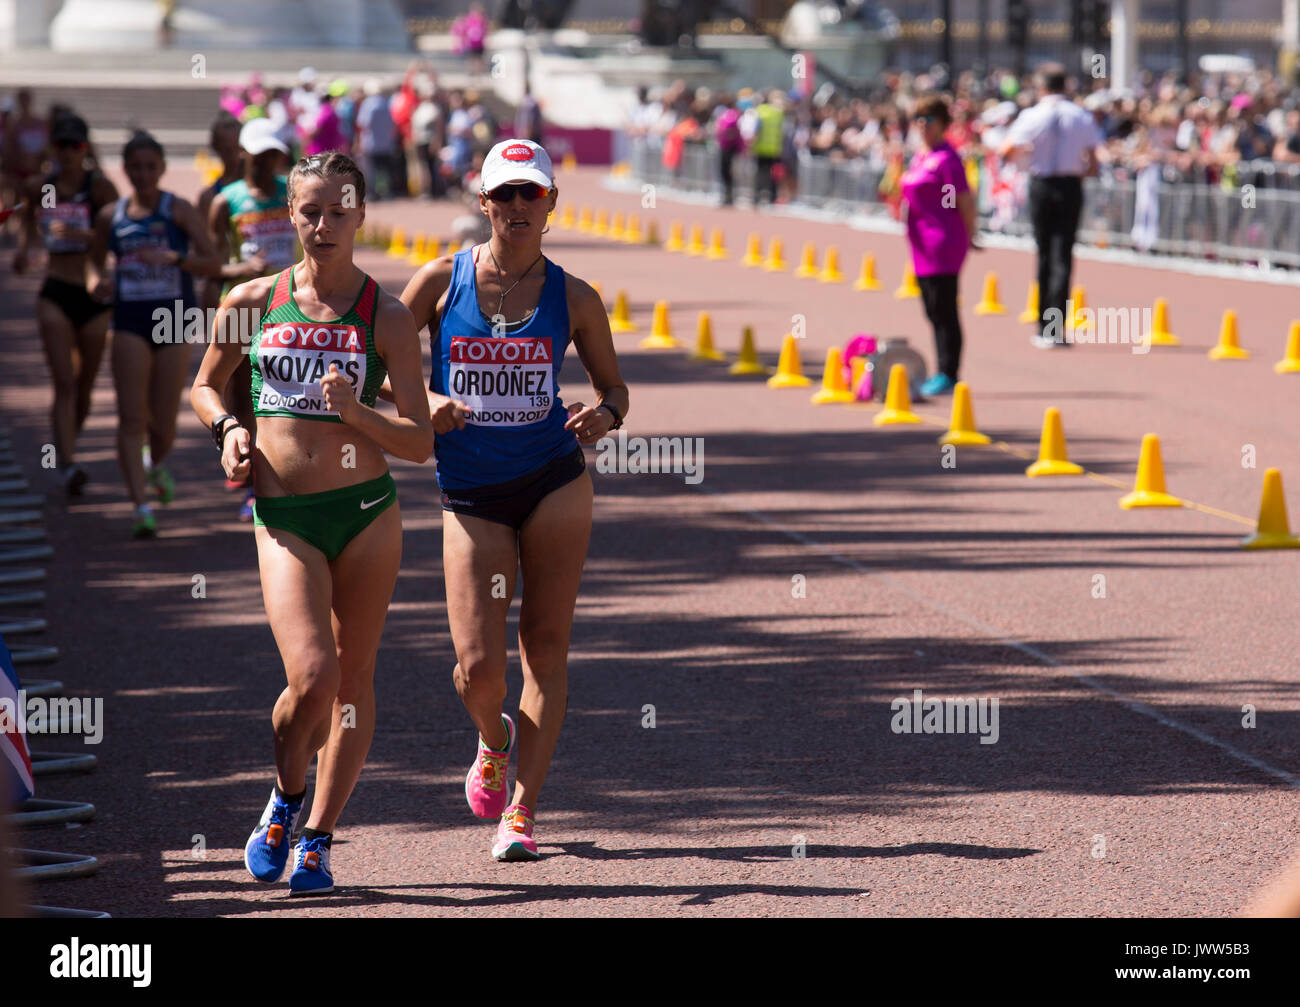 London, UK. 13th August, 2017. 20 k women Race Walk at IAAF World Championships in London, UK on August 13, 2017. The race took place on The Mall, most picturesque street of London and attracted thousands spectators. Credit: Dominika Zarzycka/Alamy Live News Stock Photo